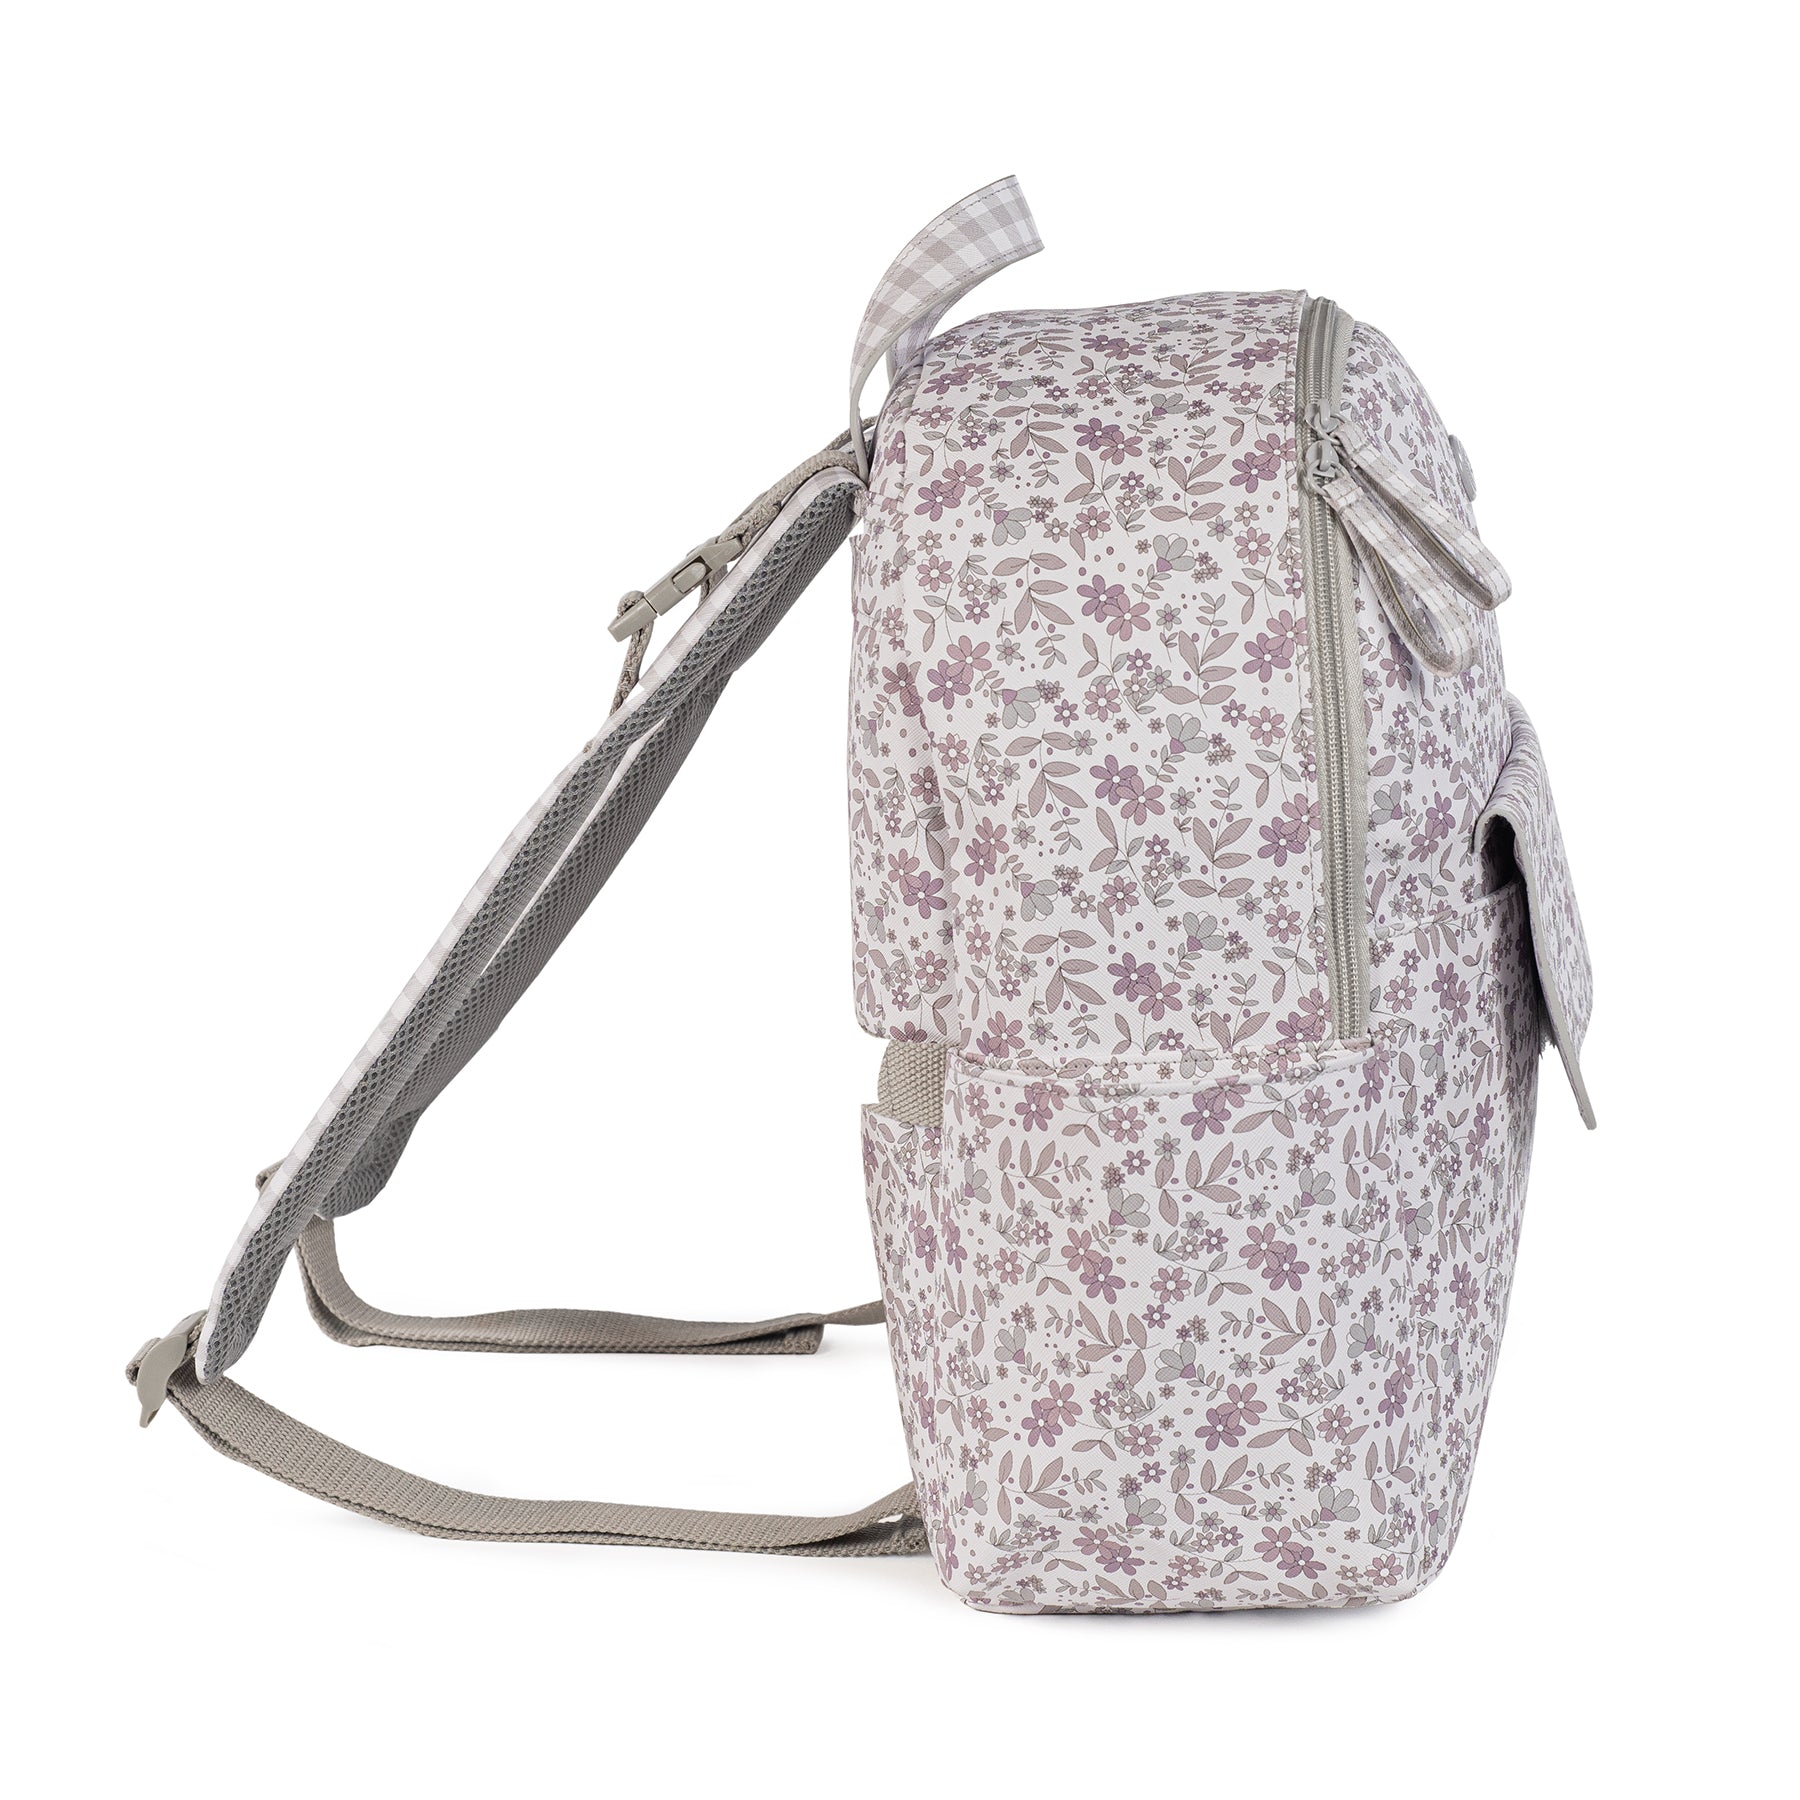 Pasito a Pasito Delia Pink Backpack Diaper Changing Bag